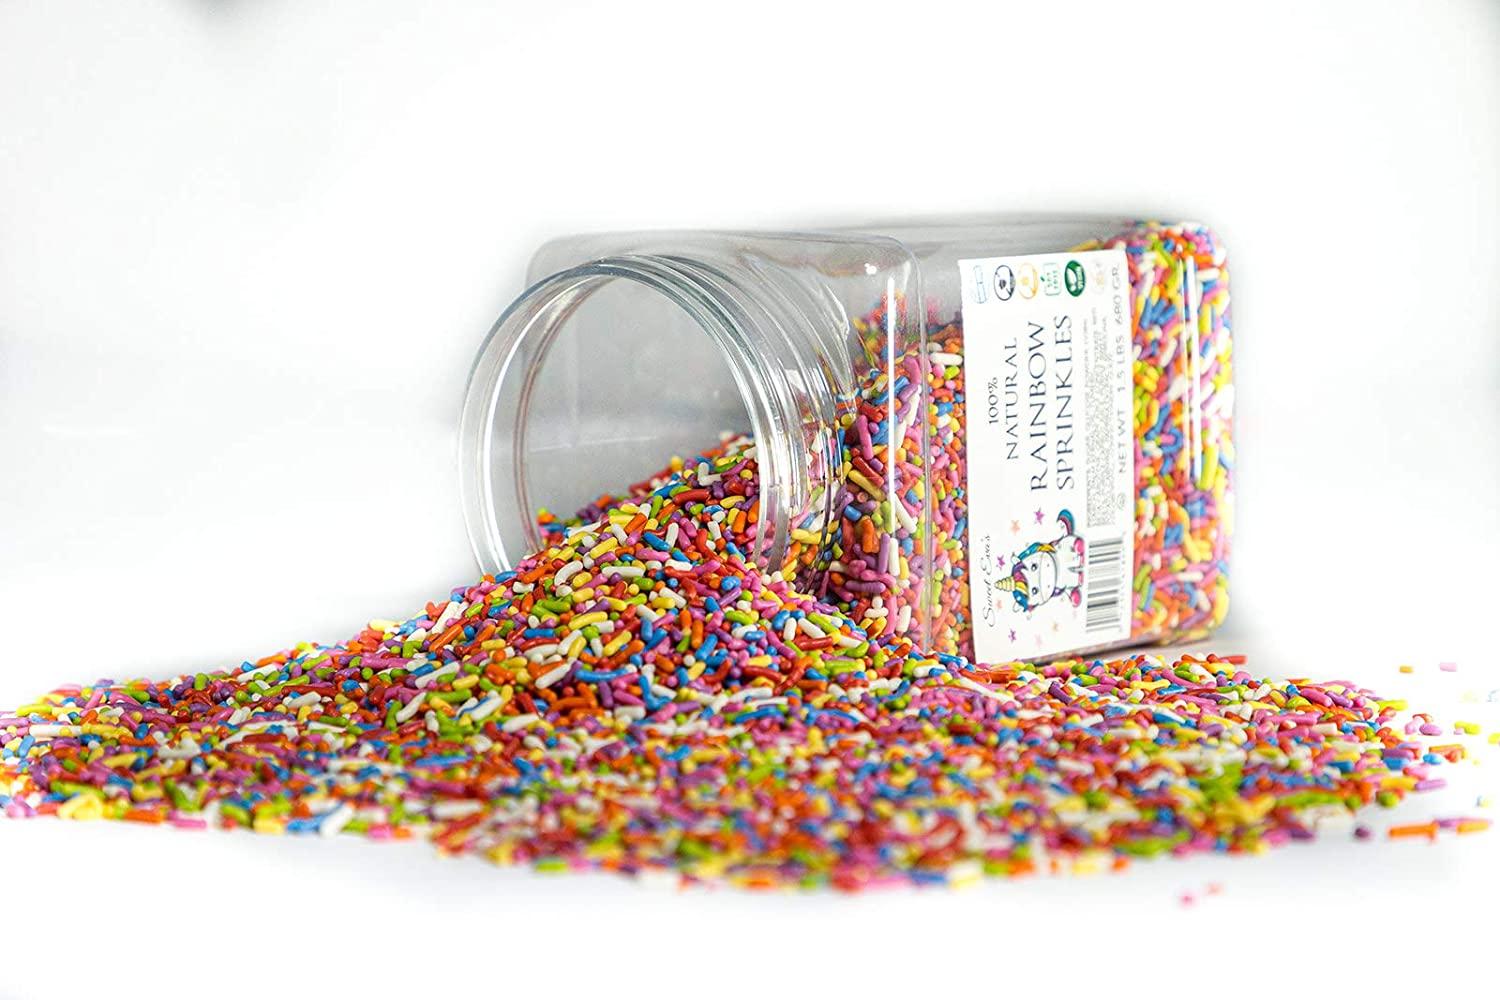 Rainbow Nonpareils Sprinkles, 1.5 lb by Unpretentious Baker, Round Sprinkles,  Gluten Free, Made in America, Clear Resealable Bag 通販 